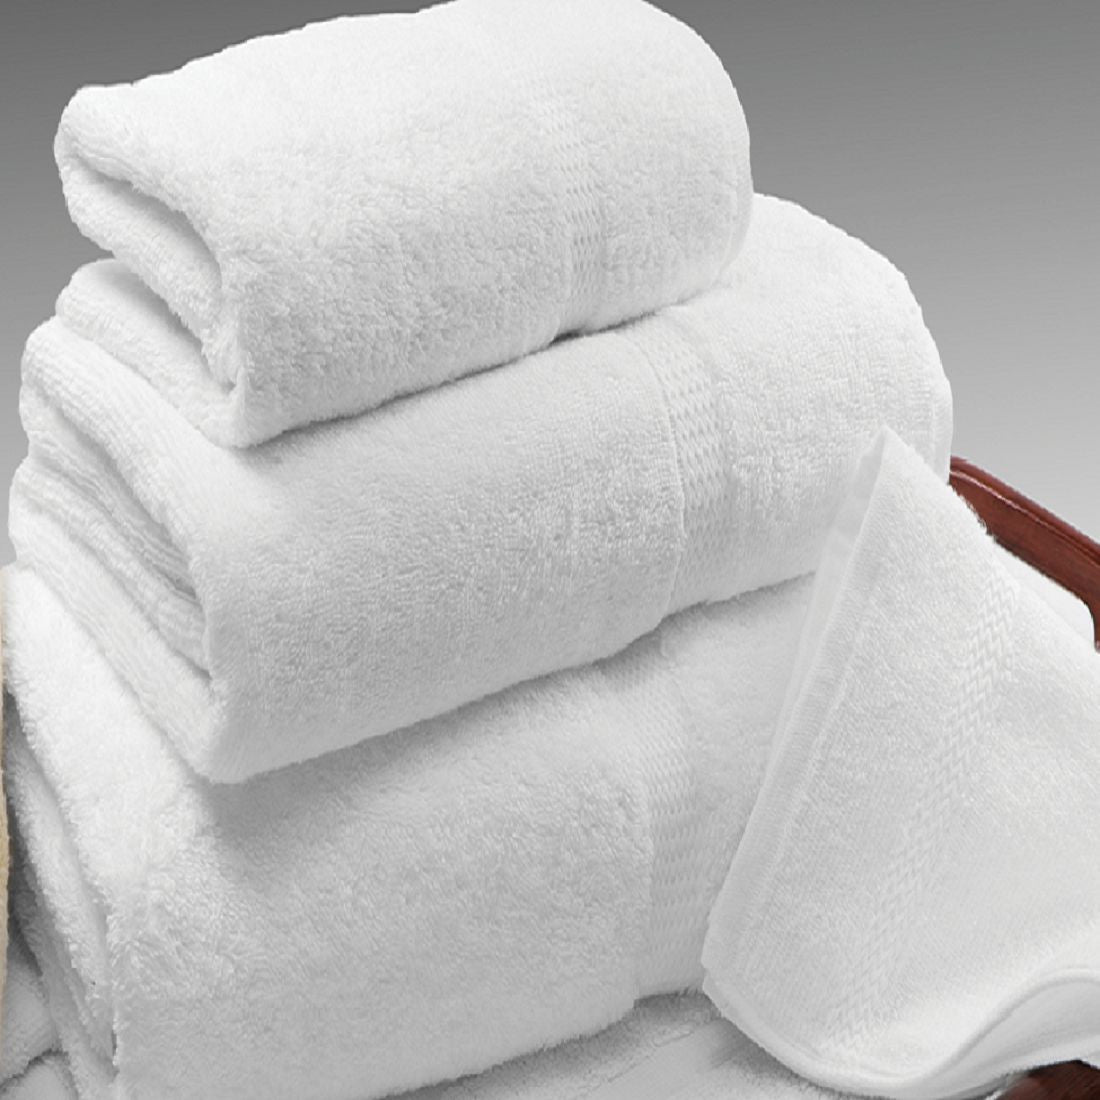 Towels N More 6 Pack New White Bath Towel (24x 50 inches) Cotton Rich for  Maximum Softness Easy Care-Home, Spa, Resort, Hotels/Motels